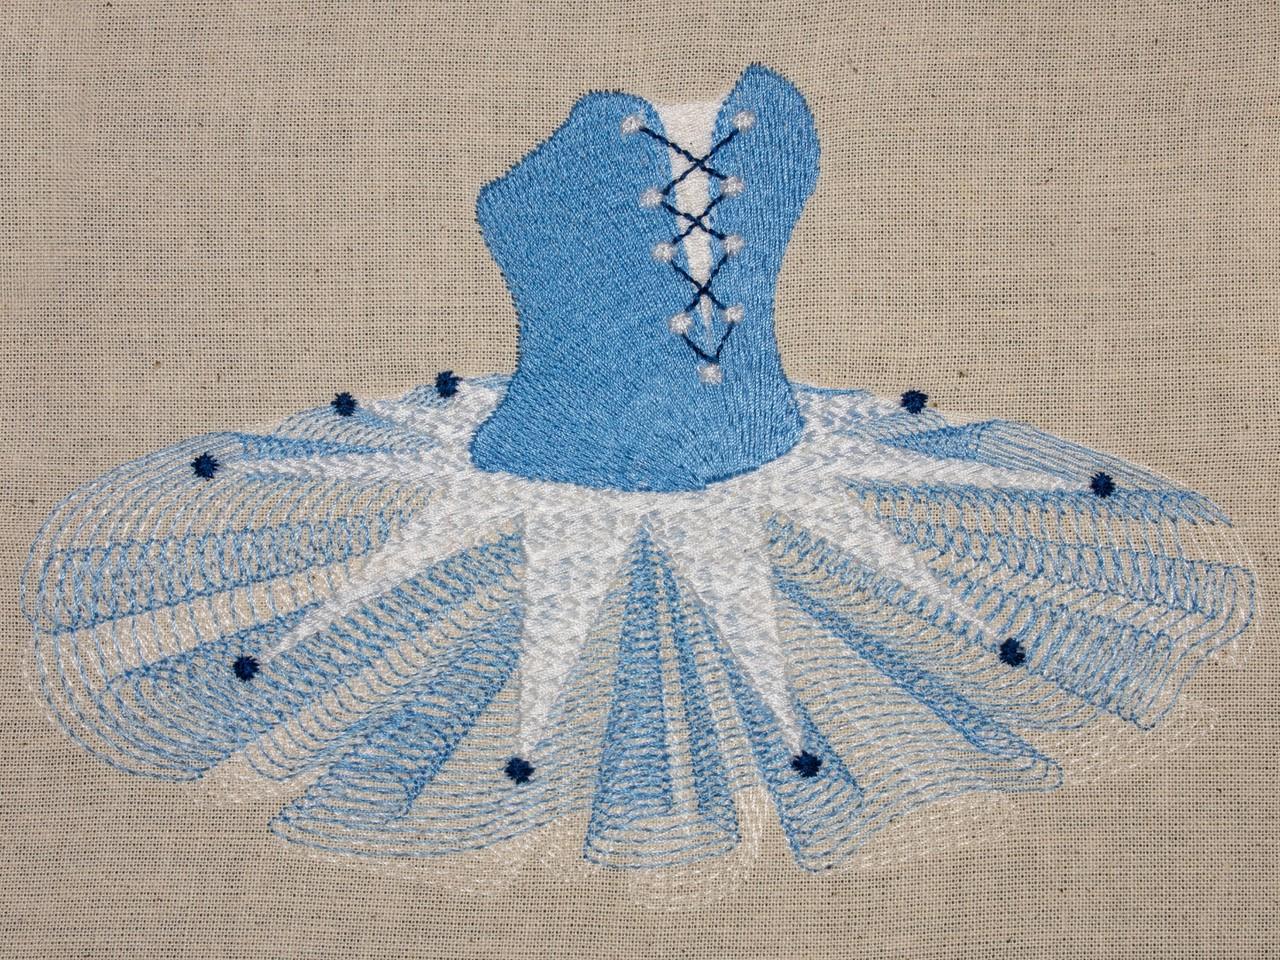 Blue Belle Tutu Embroidery Patterns by Doodle Threads